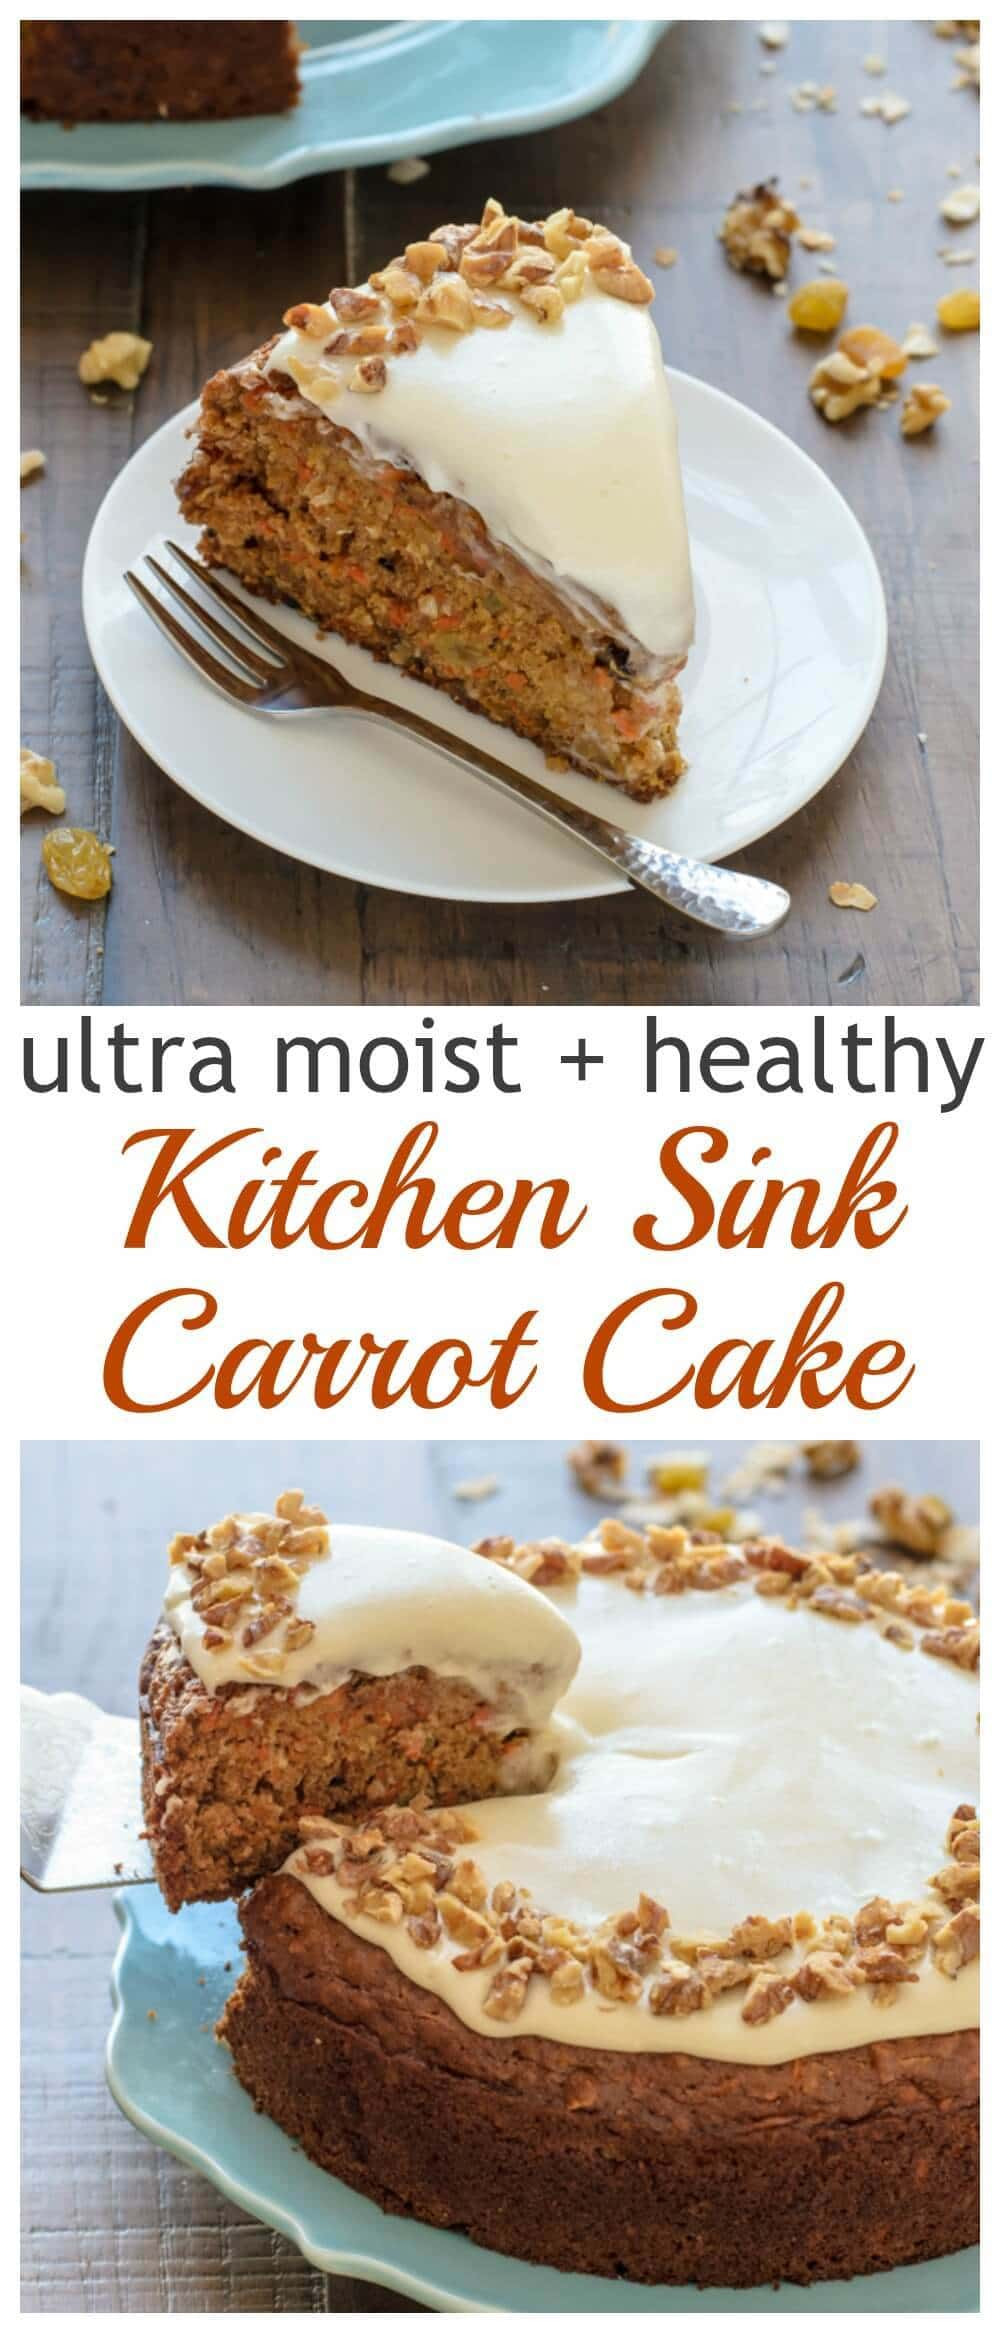 Healthy Carrot Cake Recipe
 Healthy Carrot Cake with Light Cream Cheese Frosting